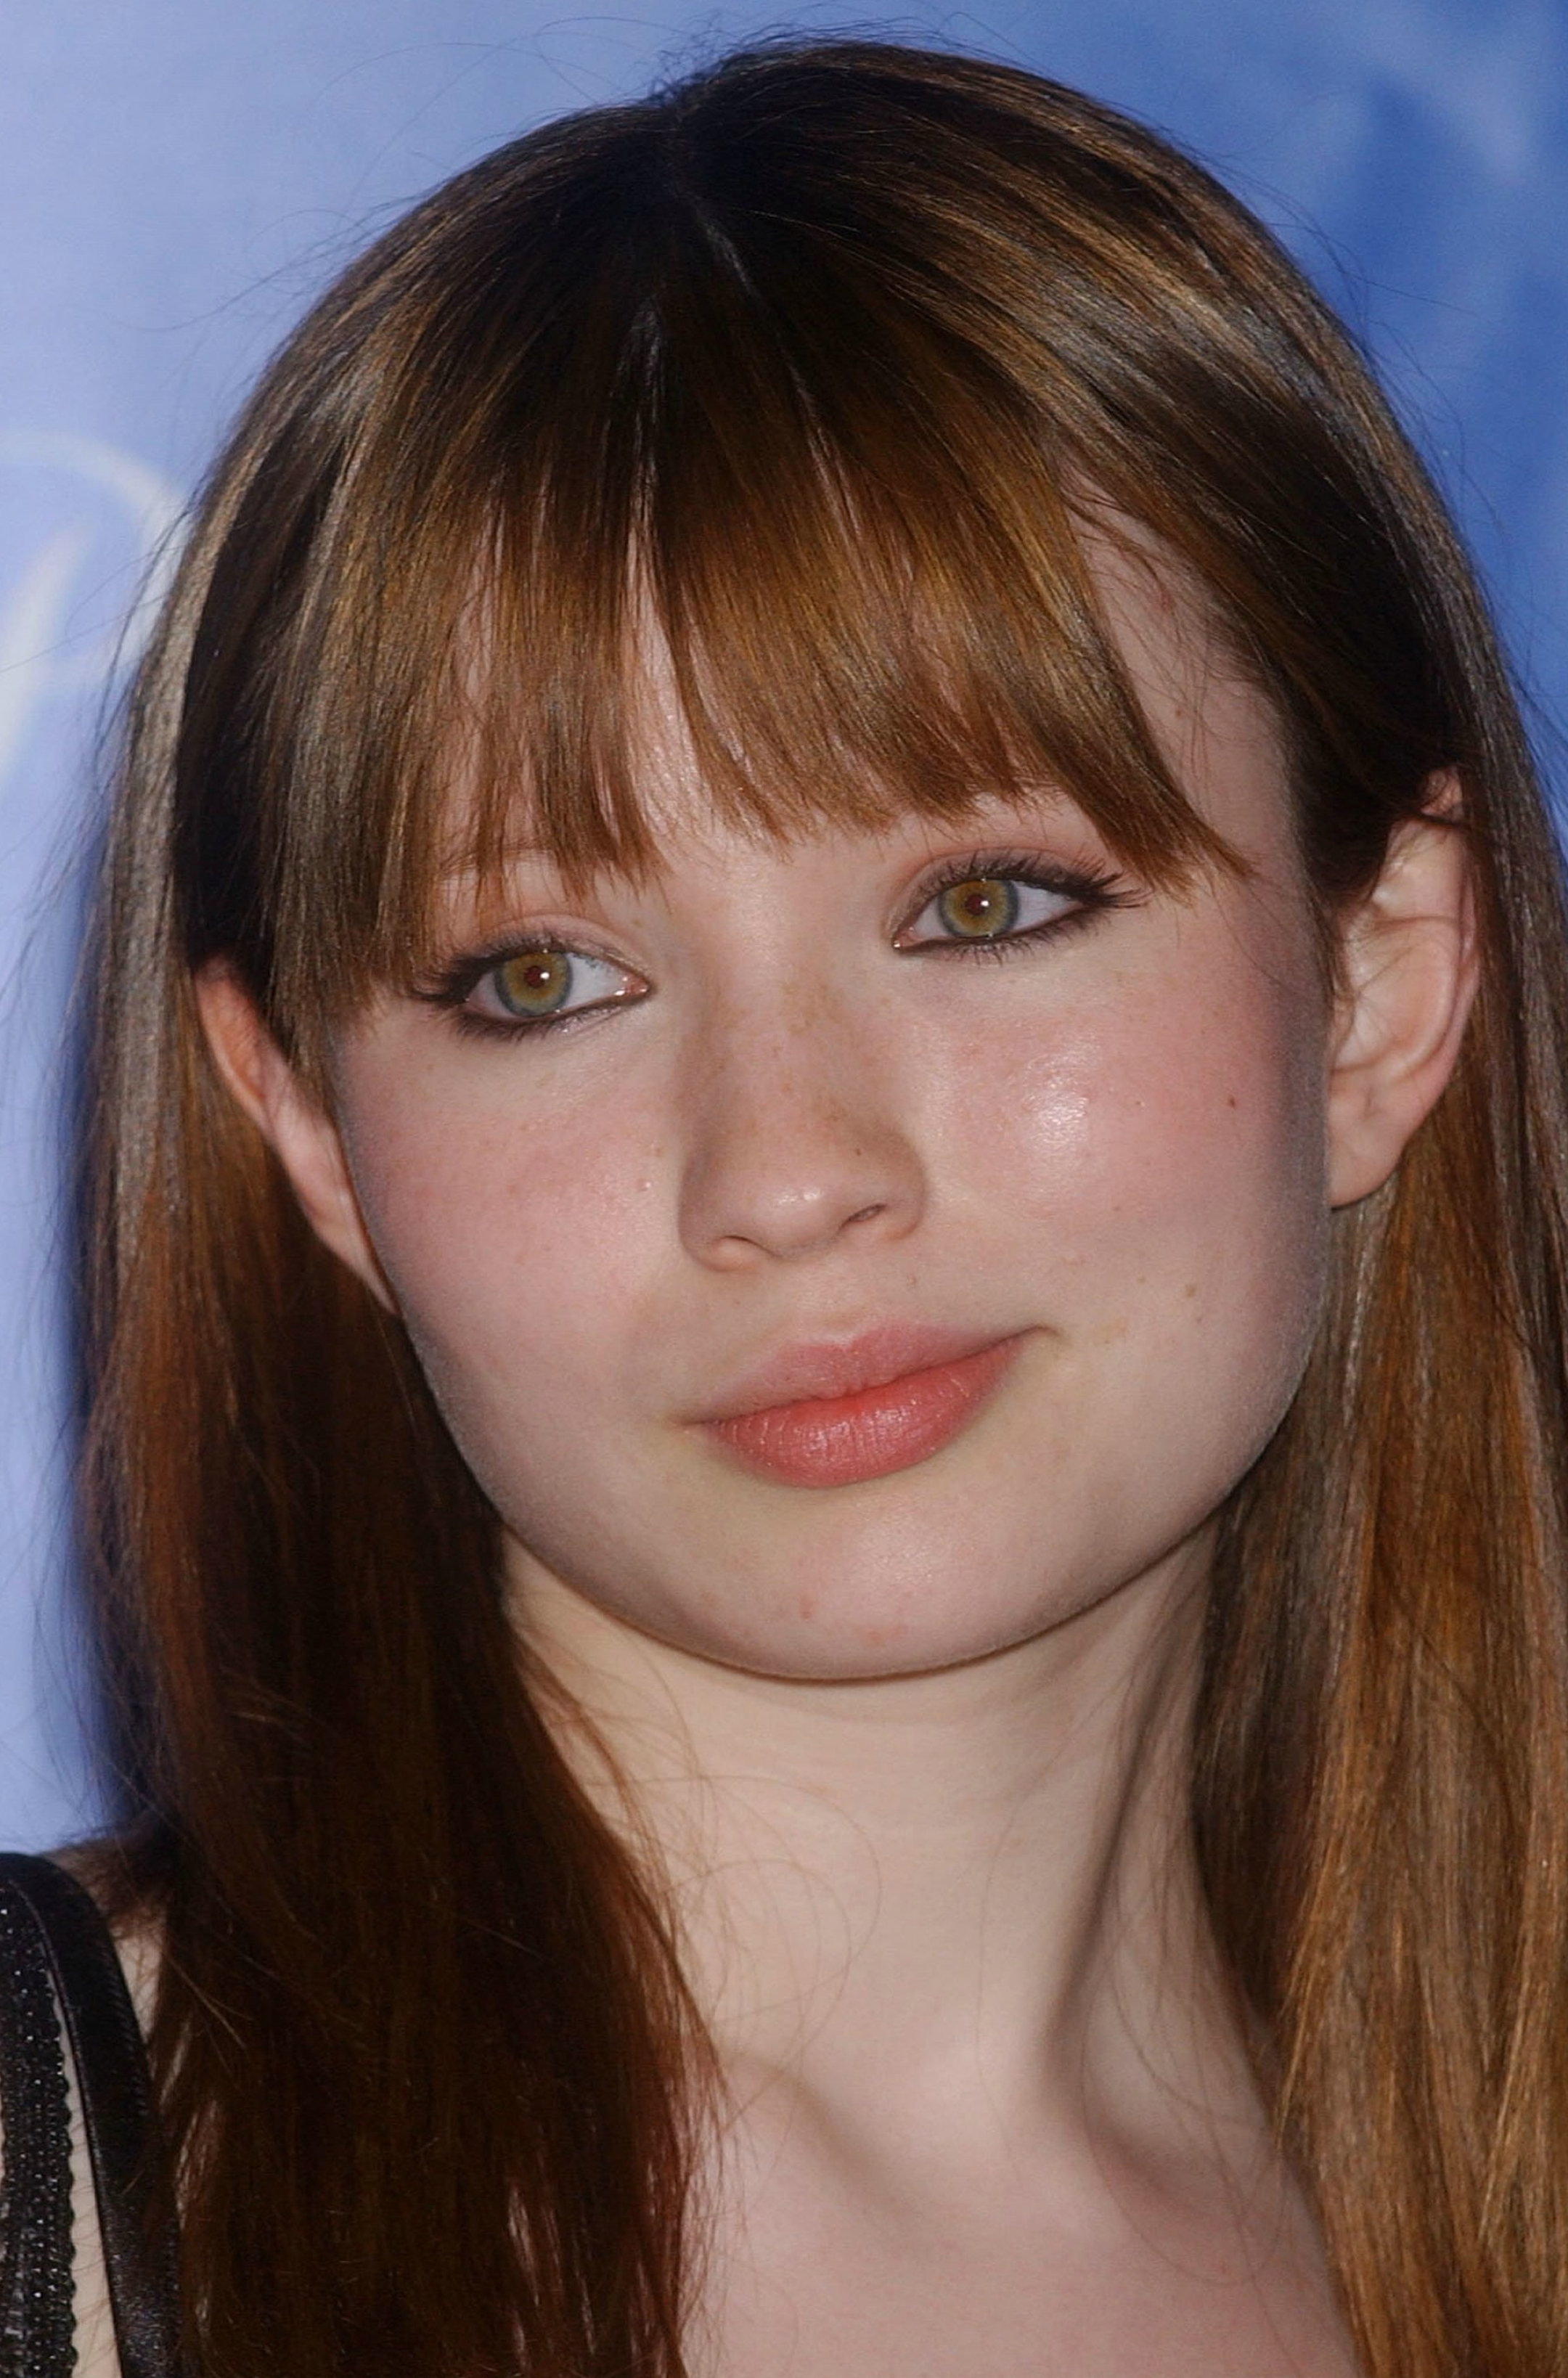 Emily Browning wallpapers, Mobile-friendly designs, Custom backgrounds, Vibrant visuals, 2160x3280 HD Handy